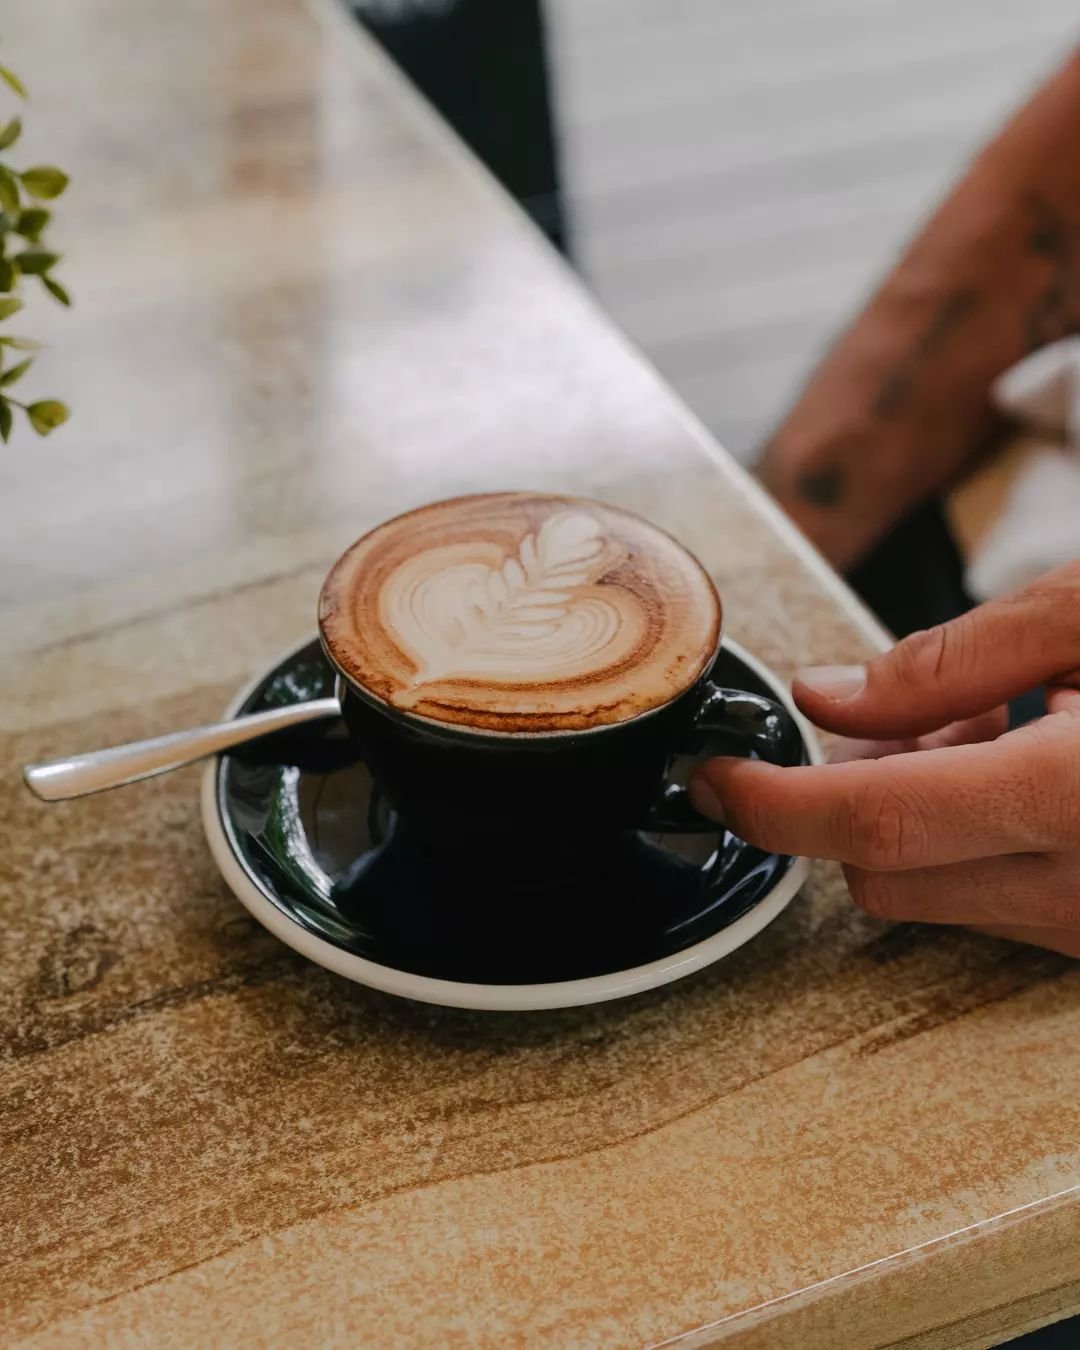 Cradle a cup of crafted perfection 🤎☕. In the heart of our cafe, every espresso swirl tells a story. Come find your chapter. 

#EspressoLove #CafeMoments #LatteArtistry #CoffeeTime #BaristaCraft